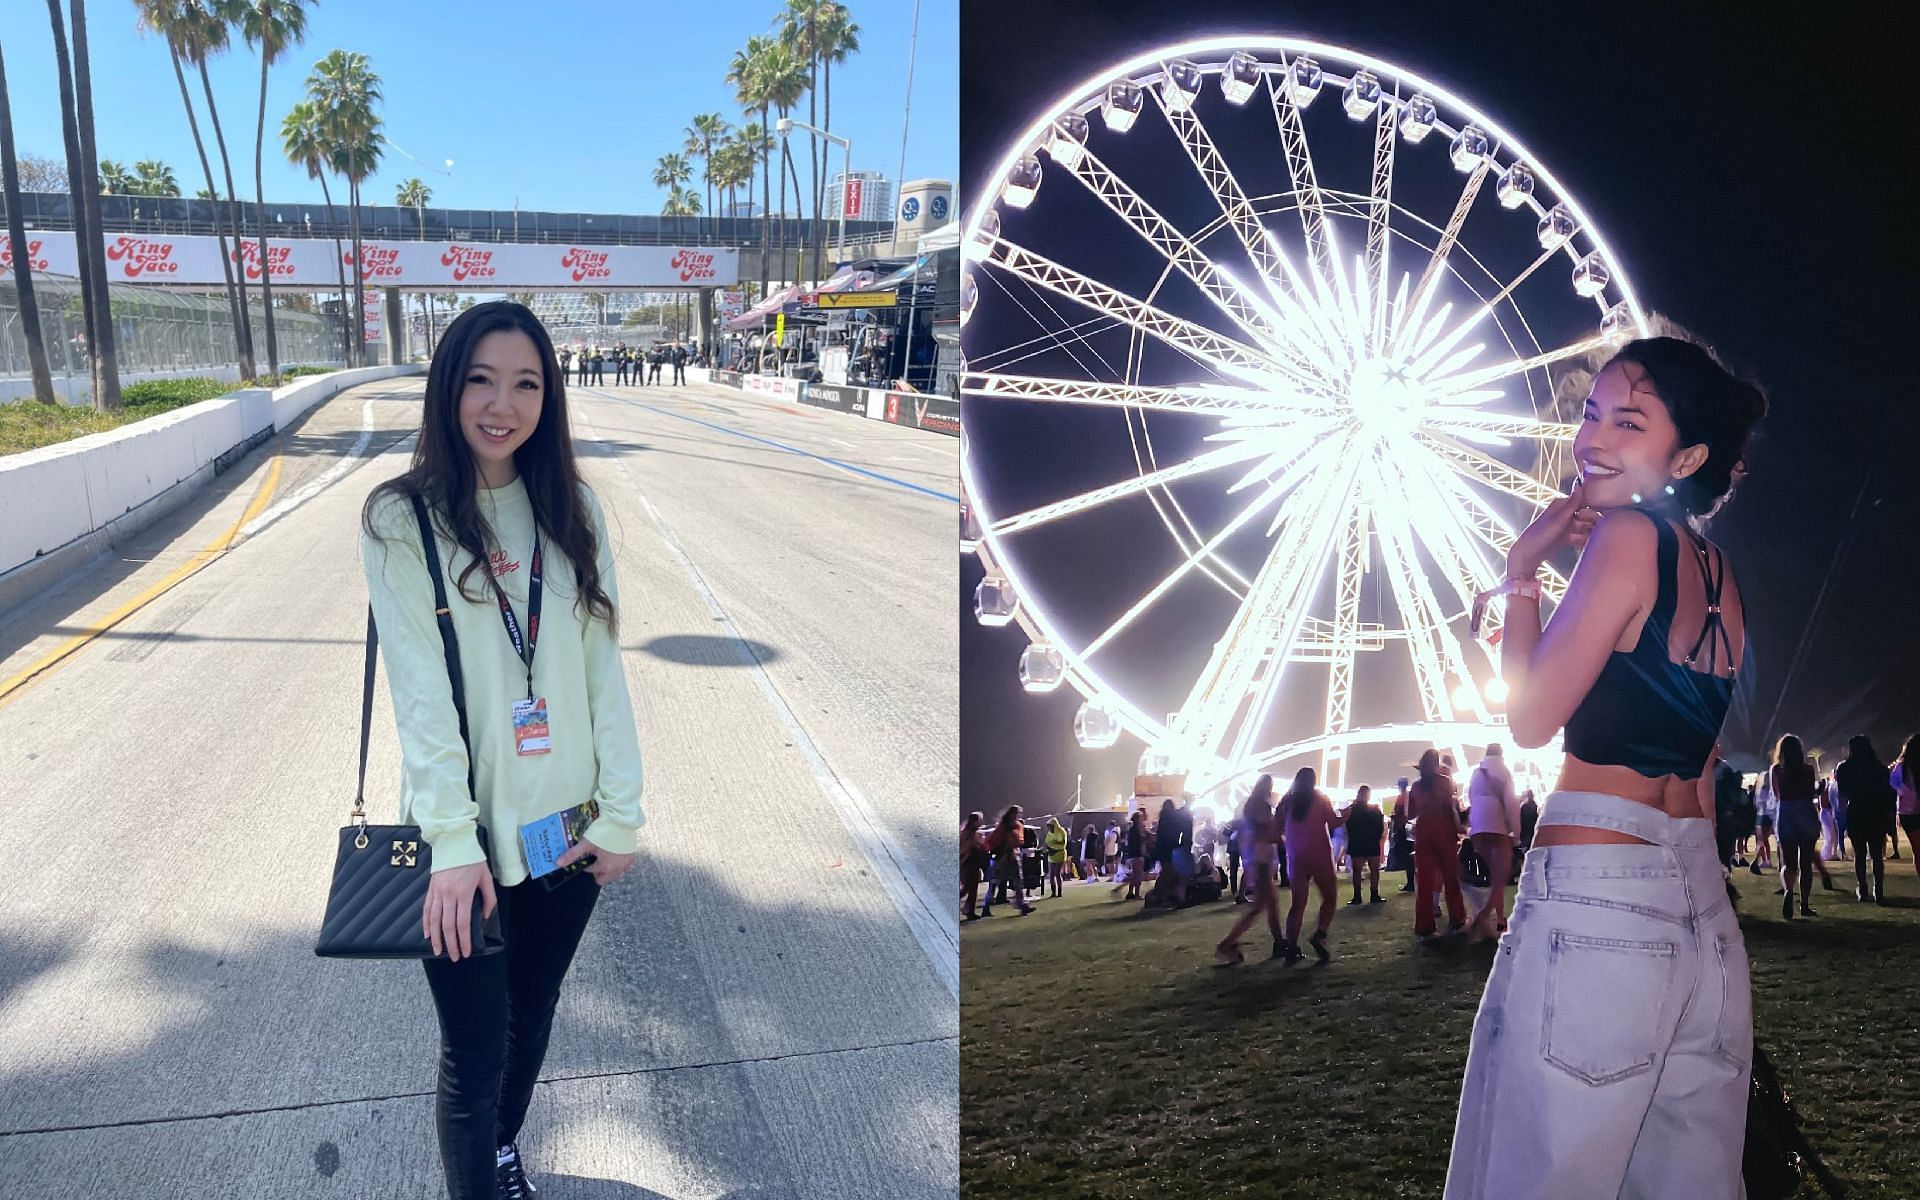 Fuslie talks about an incident that freaked Valkyrae at Coachella (Images via Leslie and Valkyrae/Twitter)